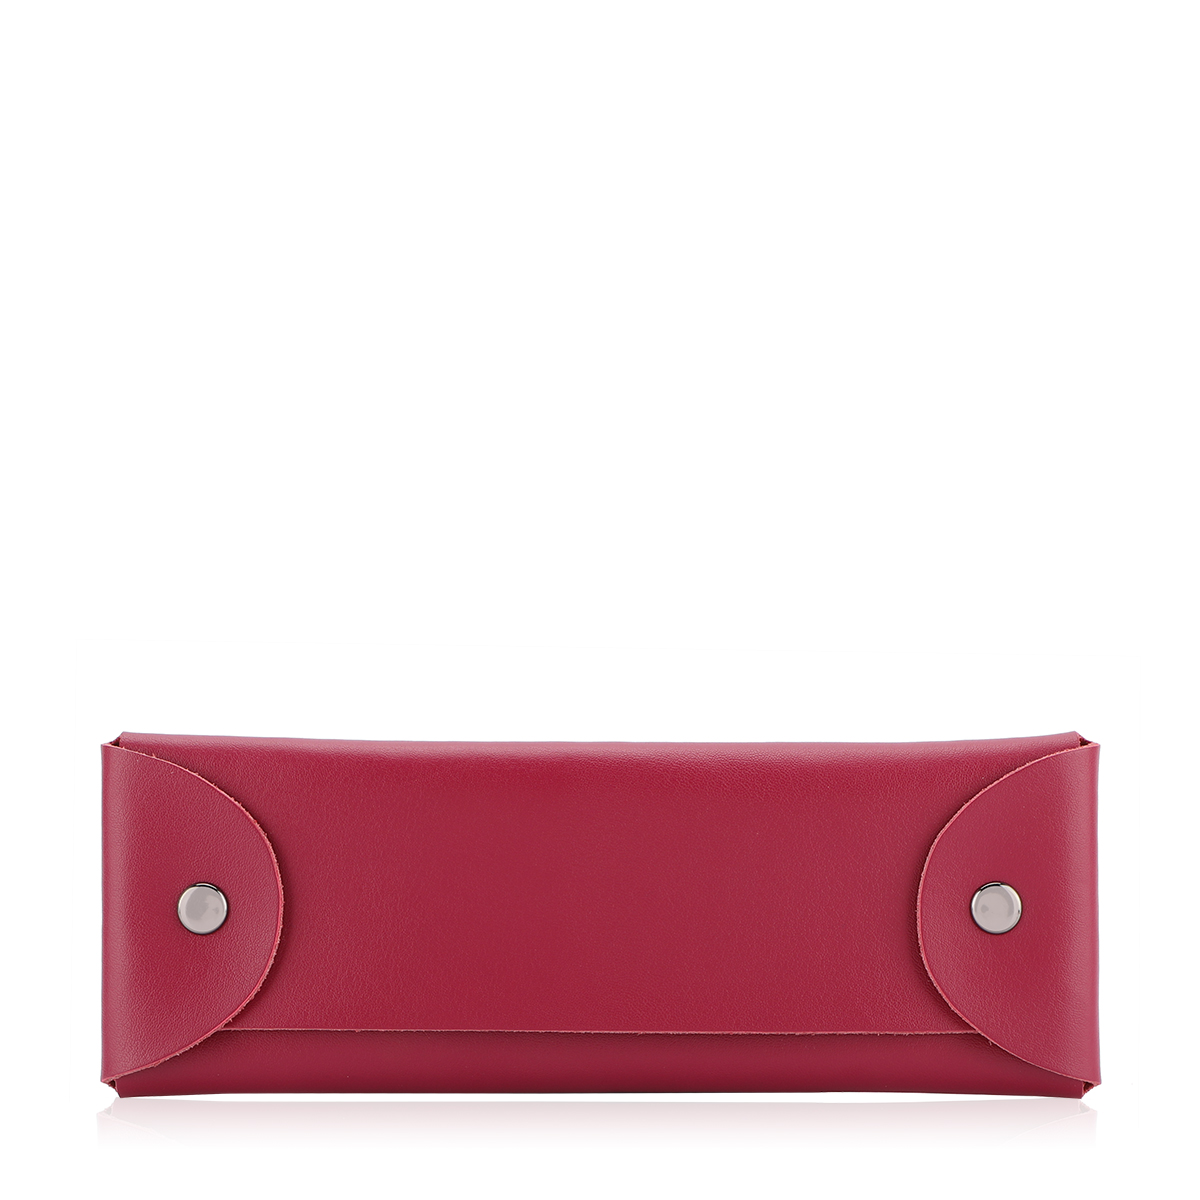 Buy Genuine Leather Origami Case - Pink Online in Qatar | Boutiqaat